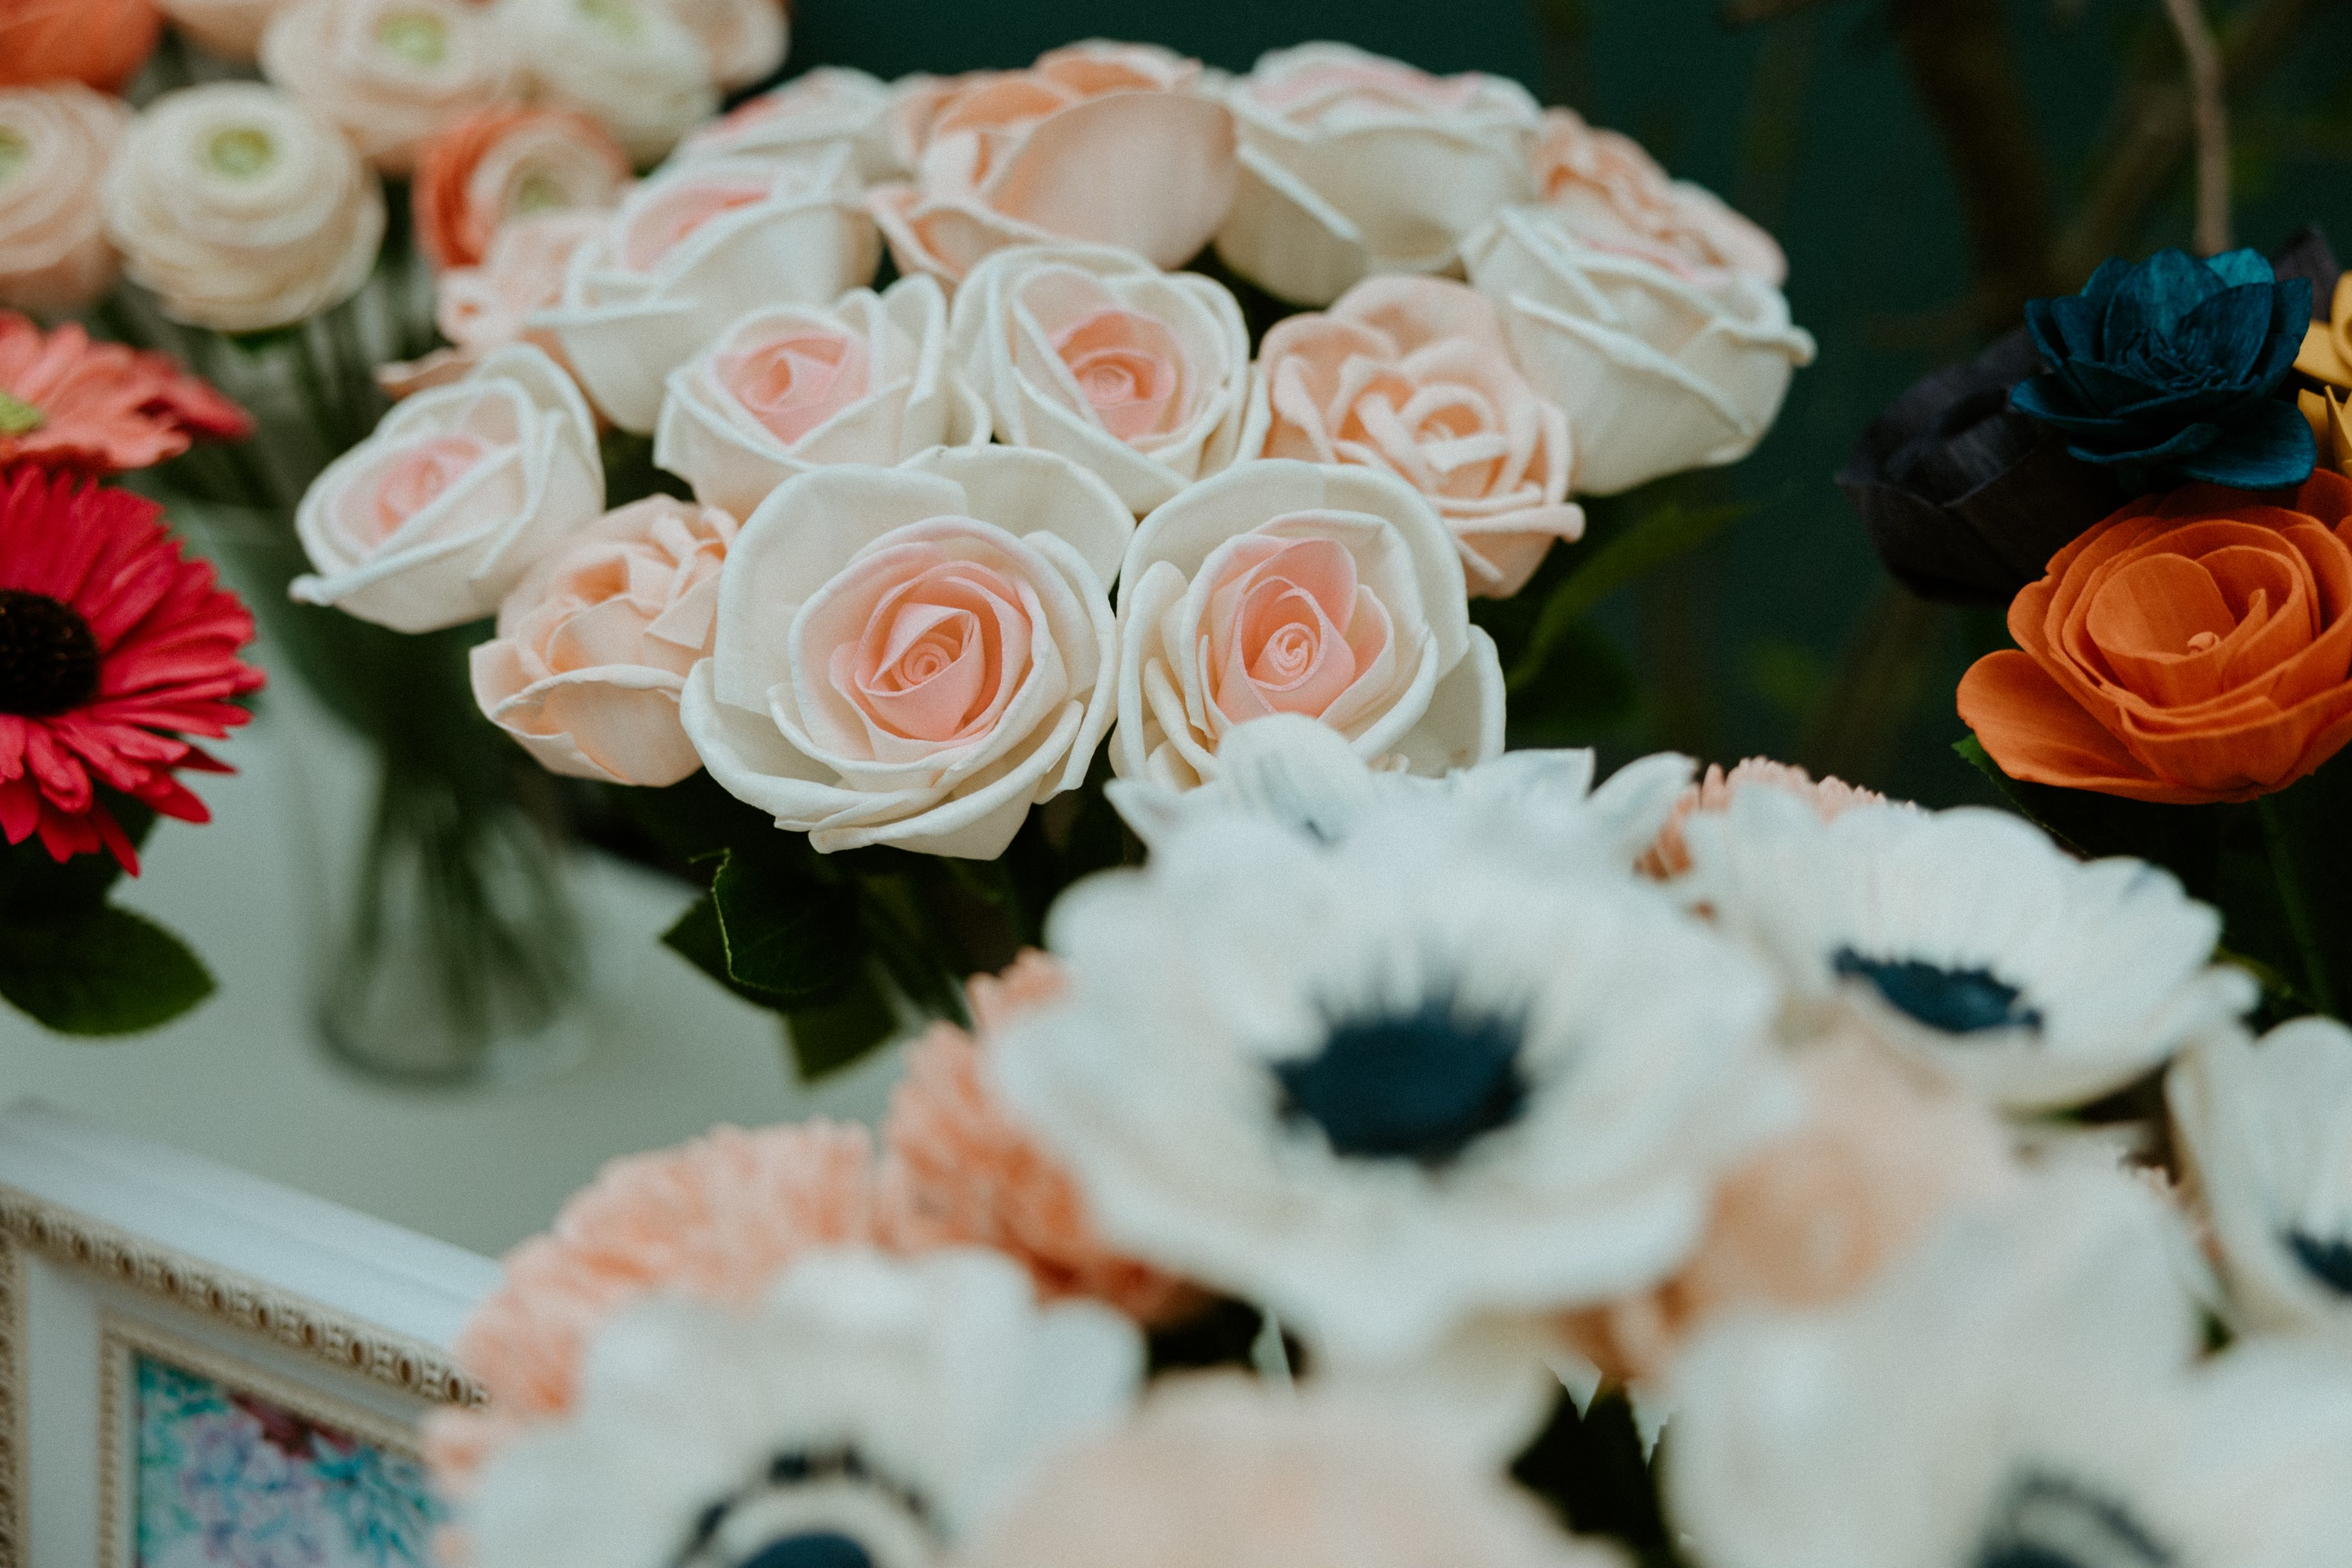 an up close image of two vases of wood flowers, white roses and anemones